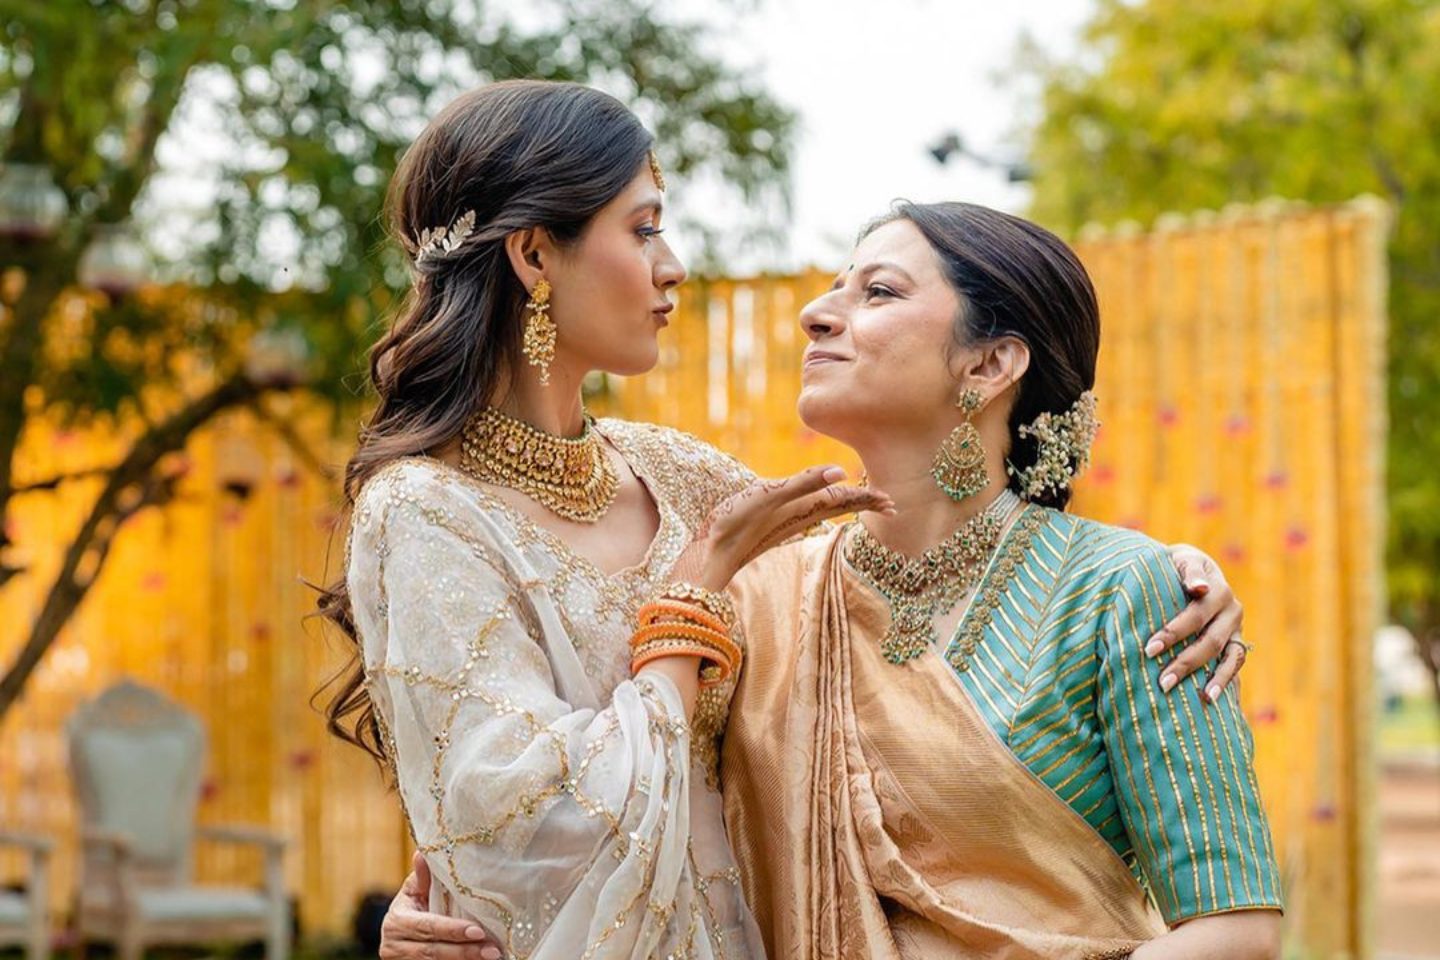 Jewels of Tradition: The Perfect Indian Bridal Jewelry Gifts for Your Daughter’s Big Day